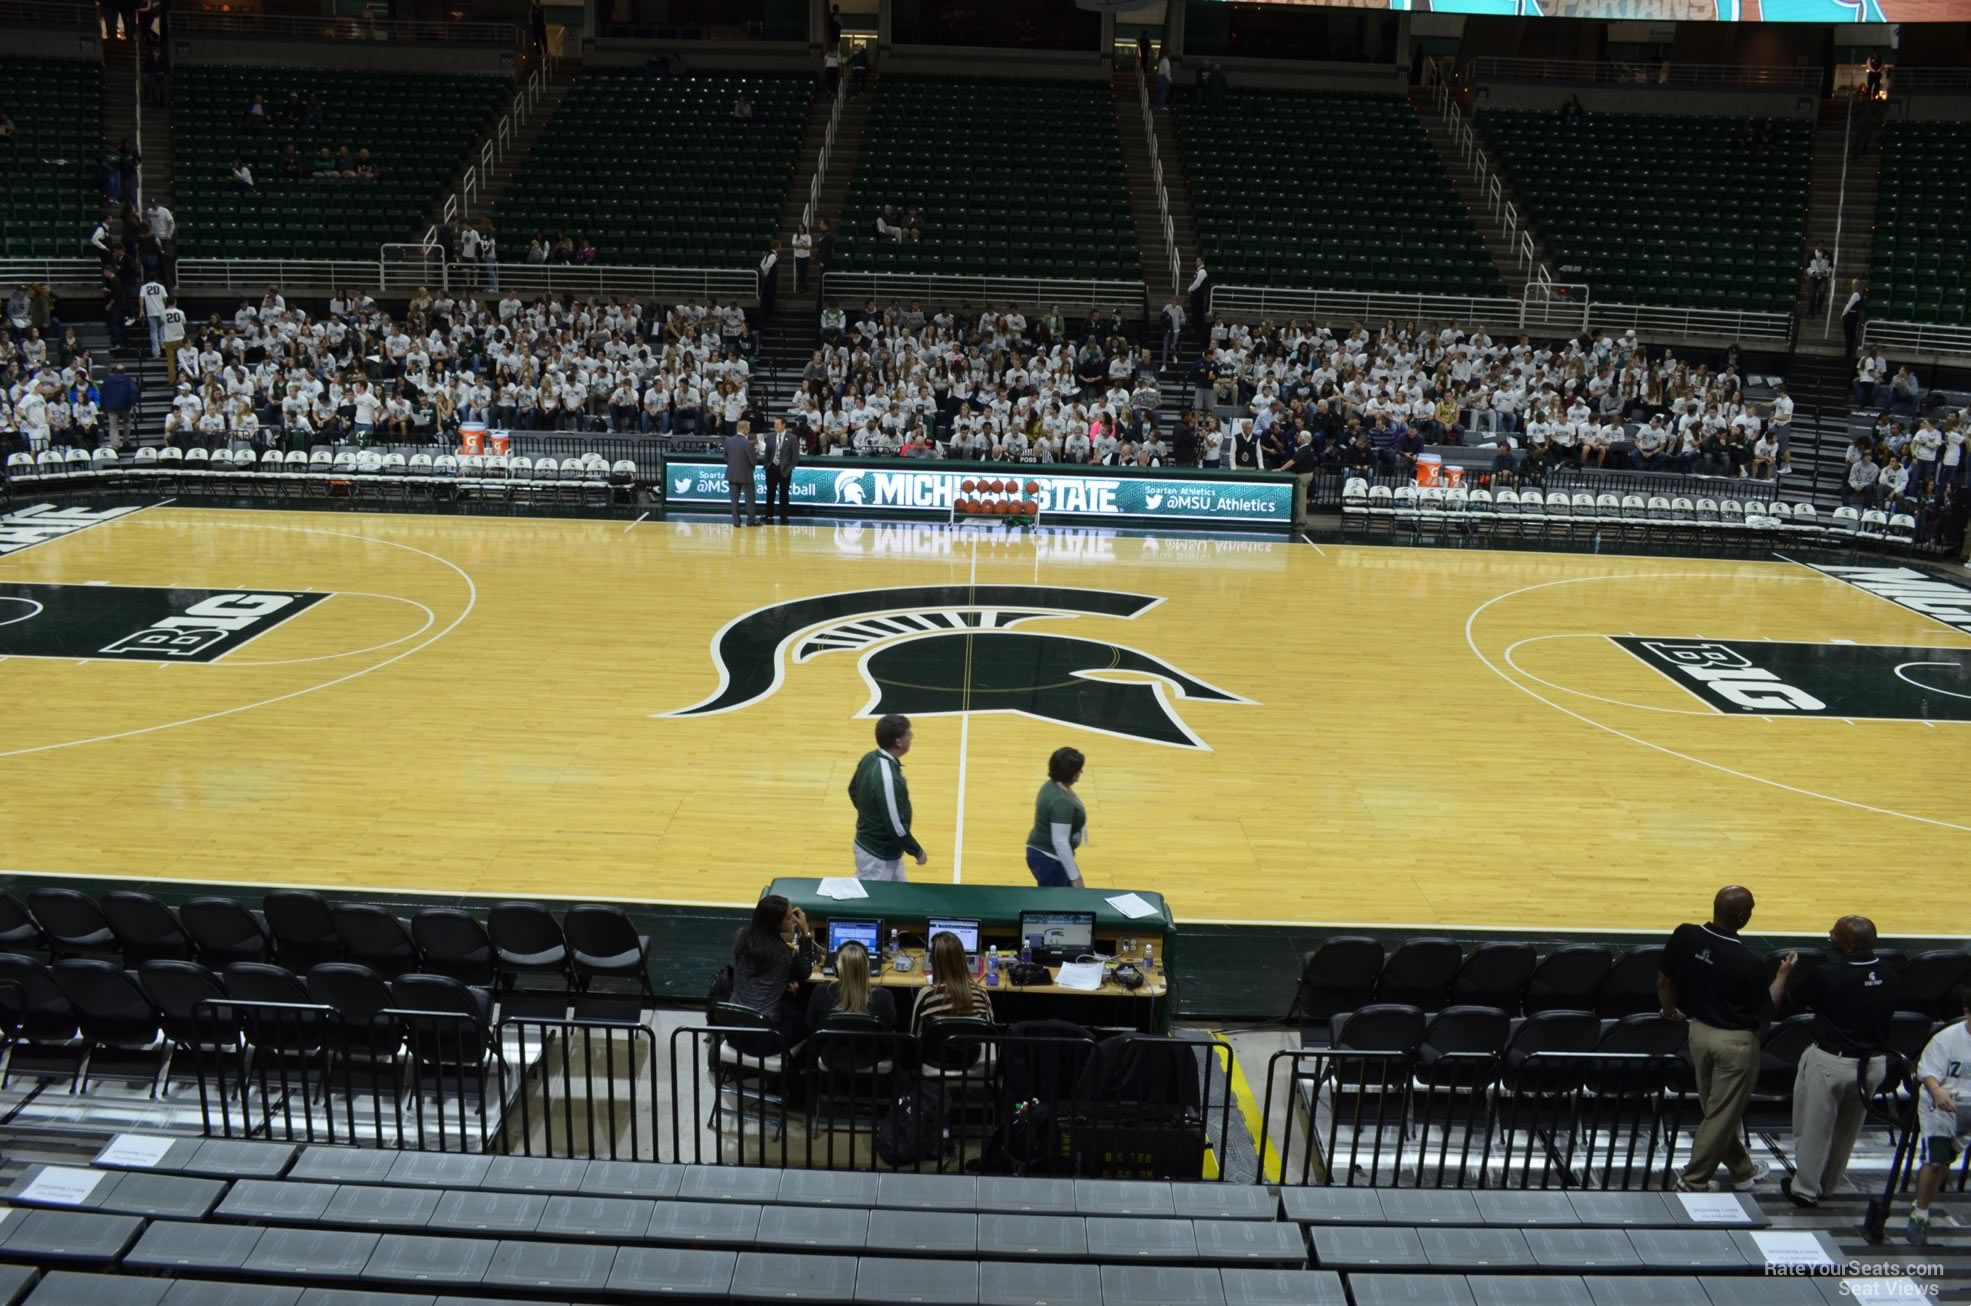 section 128, row 13 seat view  - breslin center